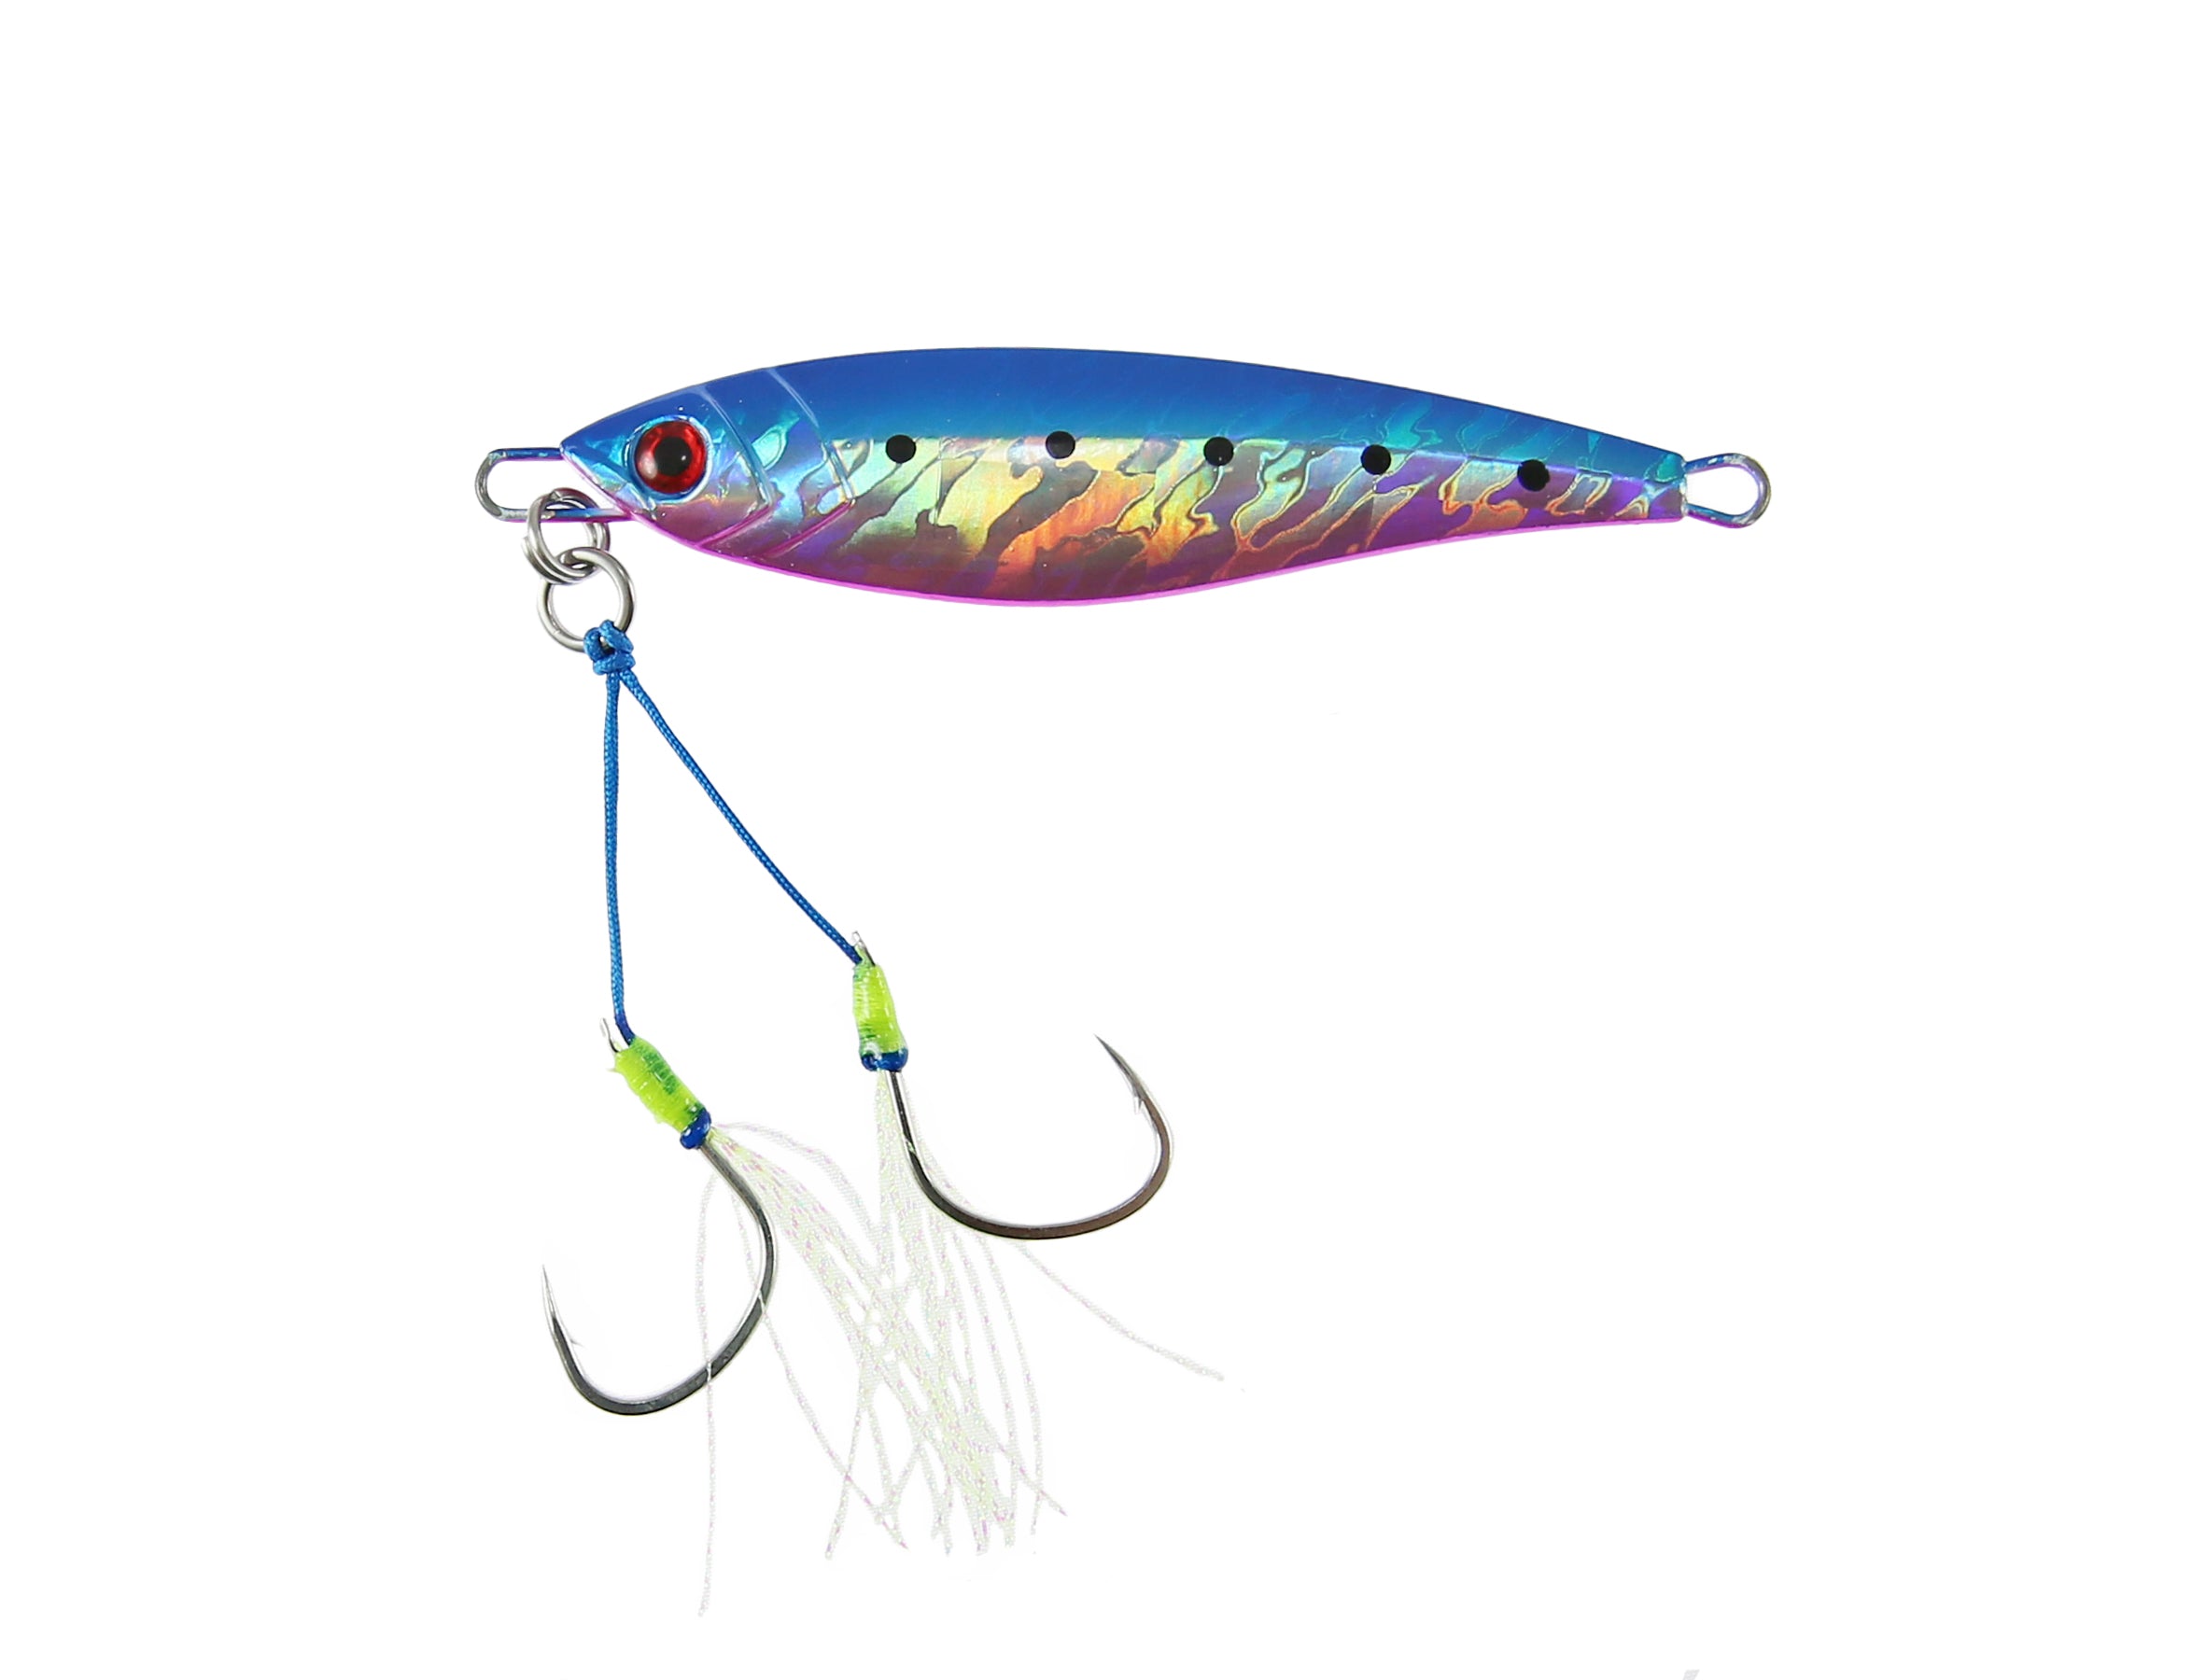 allblue jig, allblue jig Suppliers and Manufacturers at